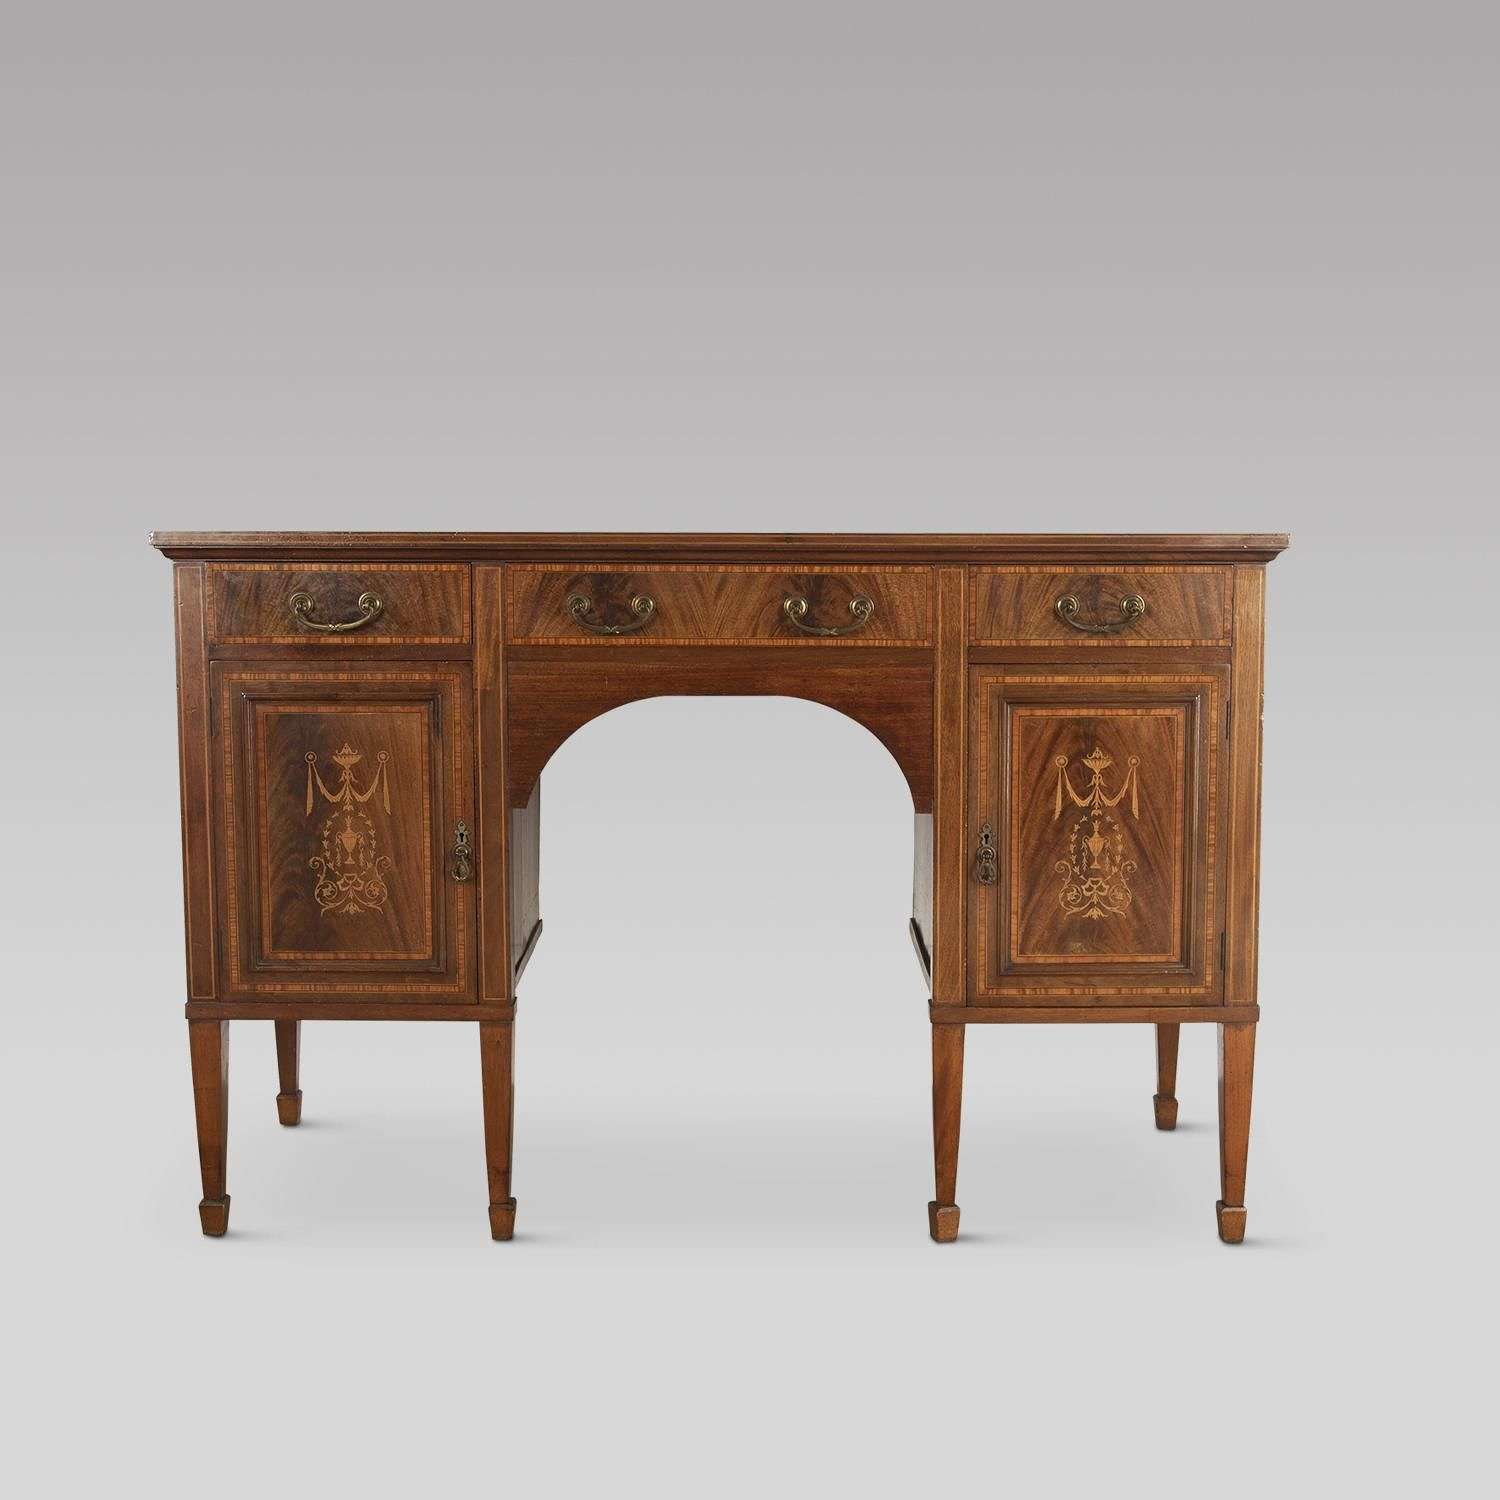 Late 19th Century Sheraton Revival Sideboard